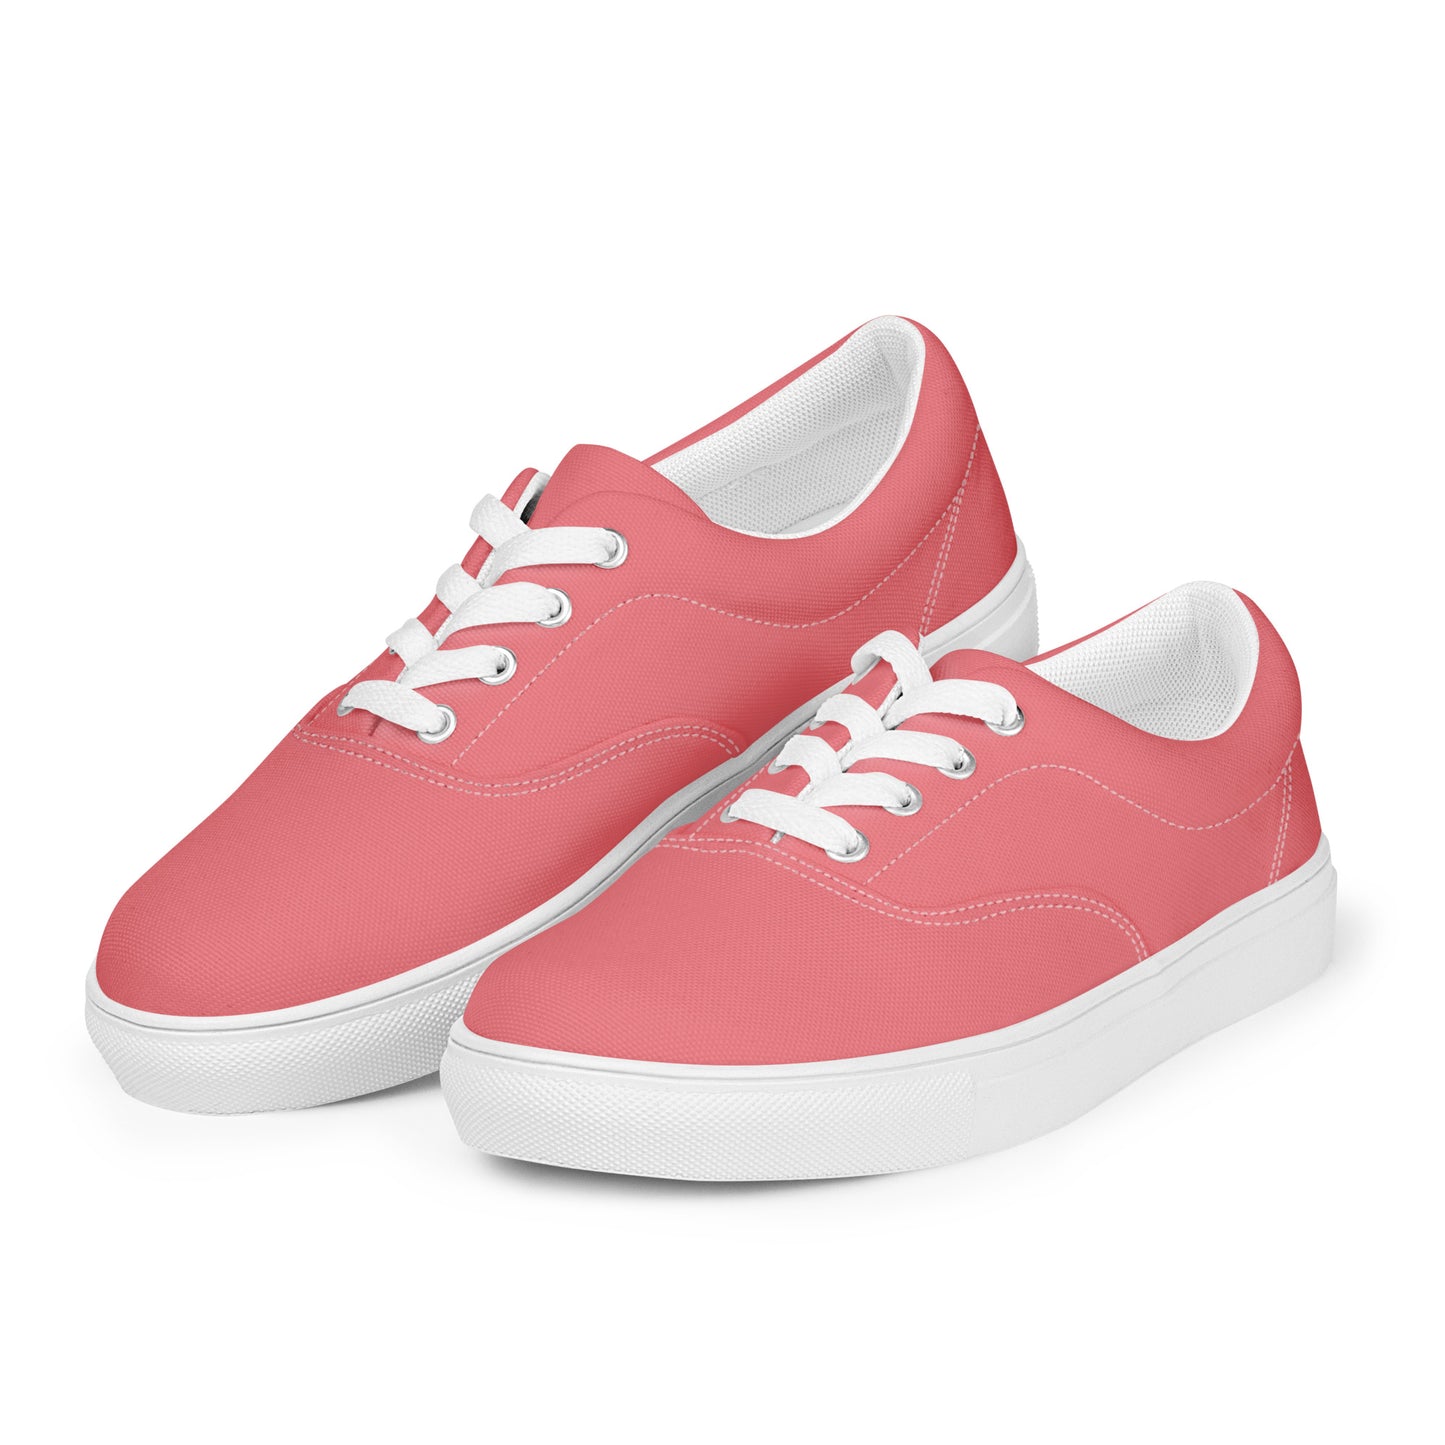 Women’s Froly Lace-up Canvas Shoes